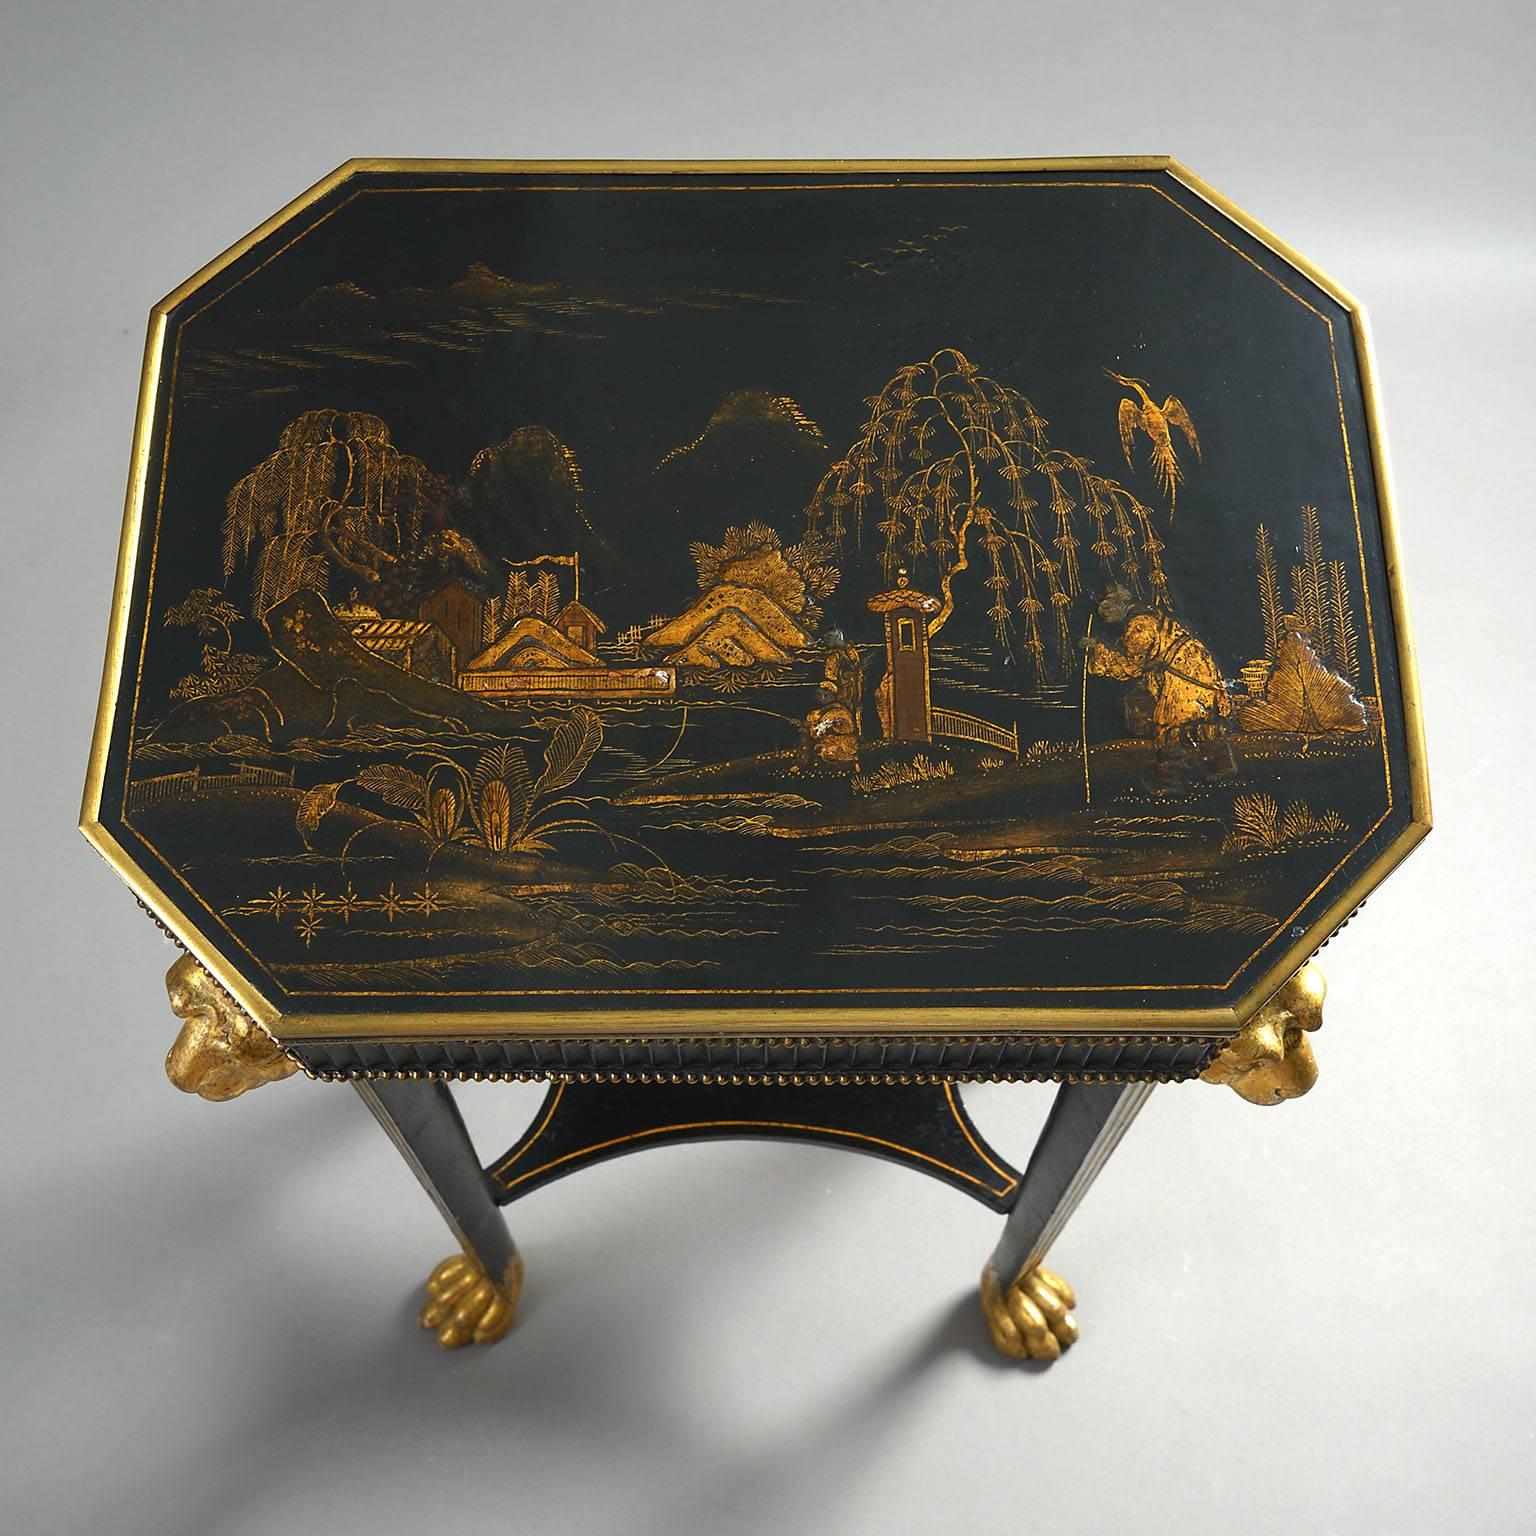 
The canted rectangular top with brass borders and decorated in chinoiserie lacquer depicting figures and birds with pagodas in a mountainous landscape. The fluted frieze with brass beaded mouldings supported on fluted monopod legs with carved